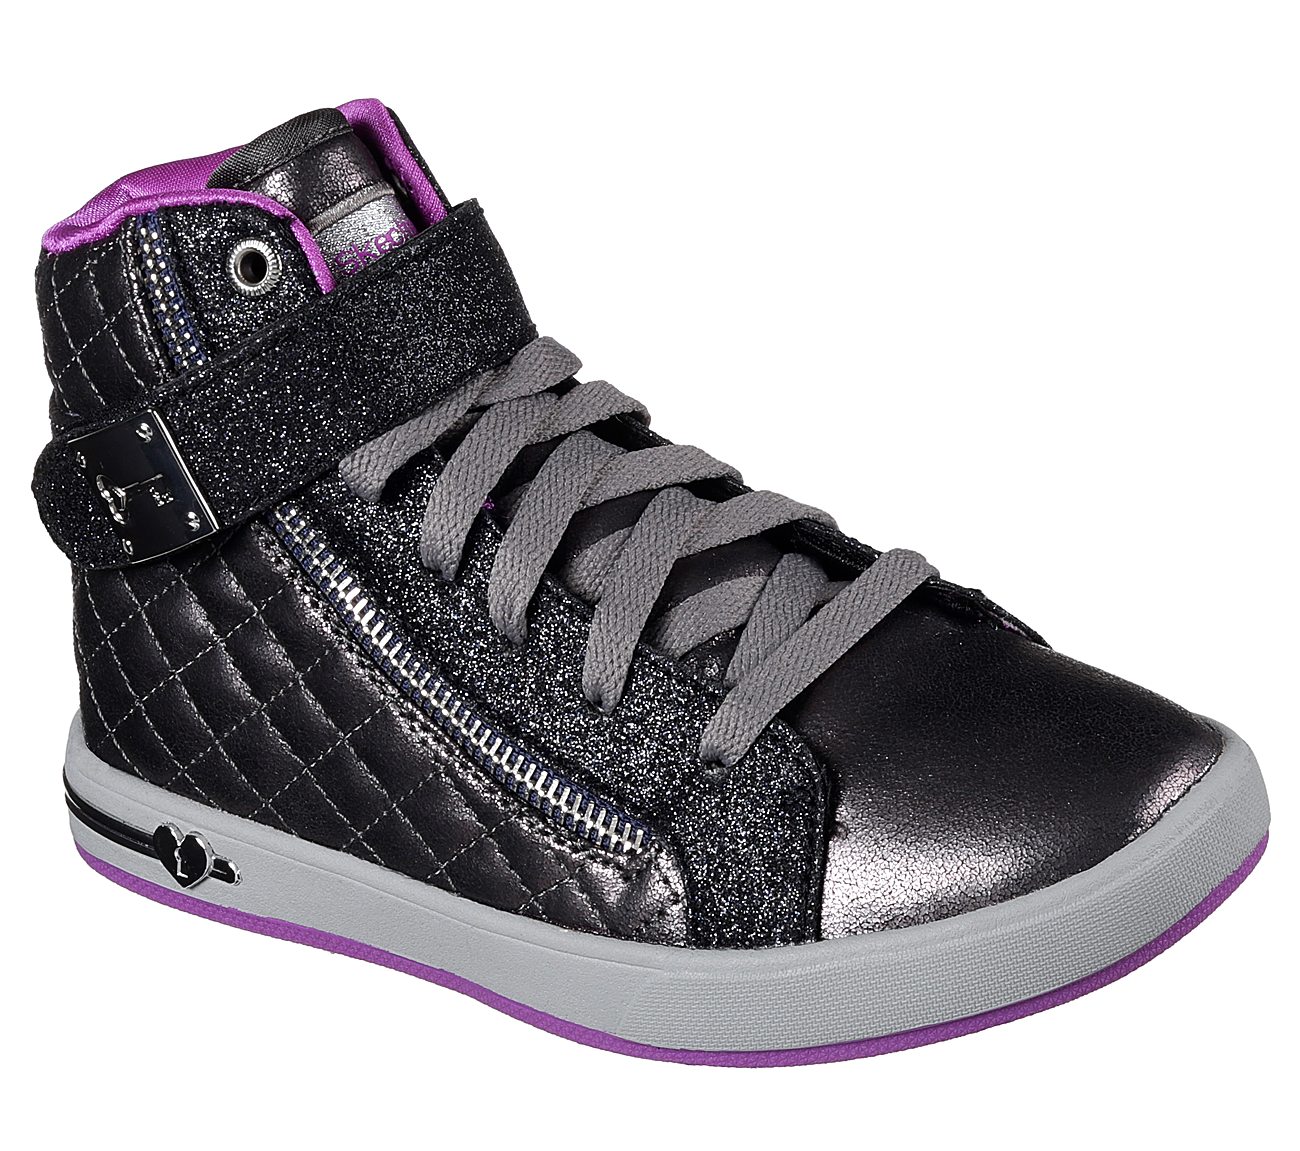 Buy SKECHERS Shoutouts - Quilted Crush 